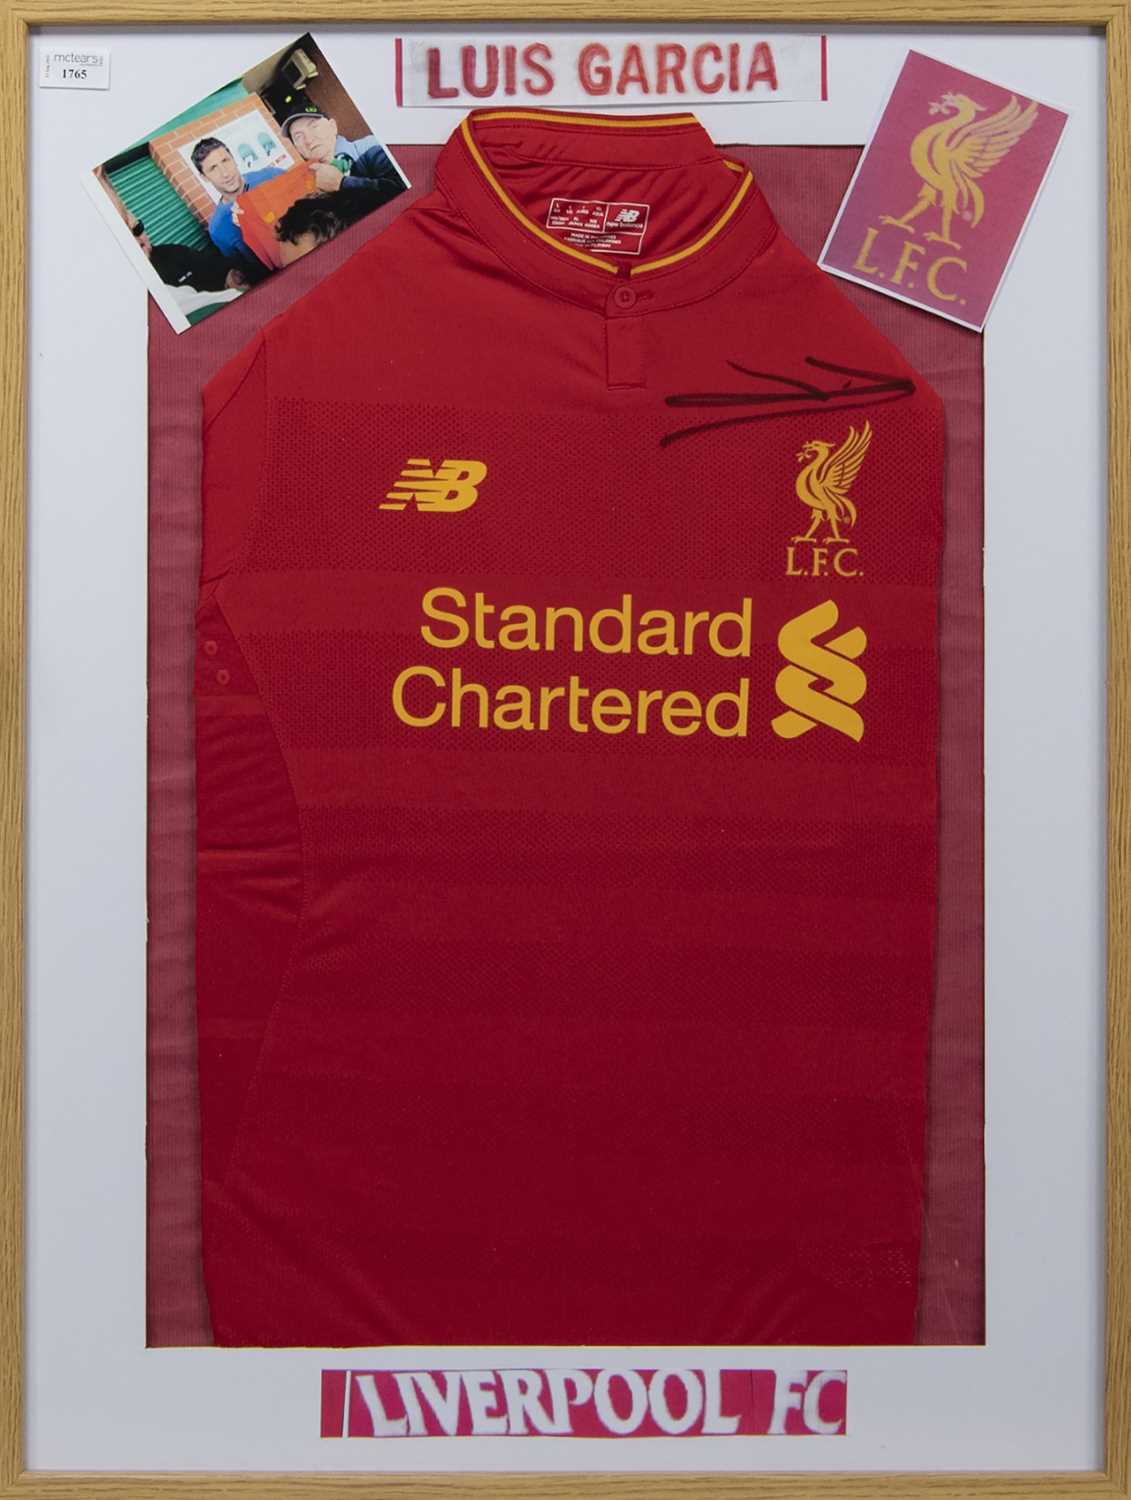 Lot 1765 - A LUIS GARCIA SIGNED LIVERPOOL F.C. JERSEY